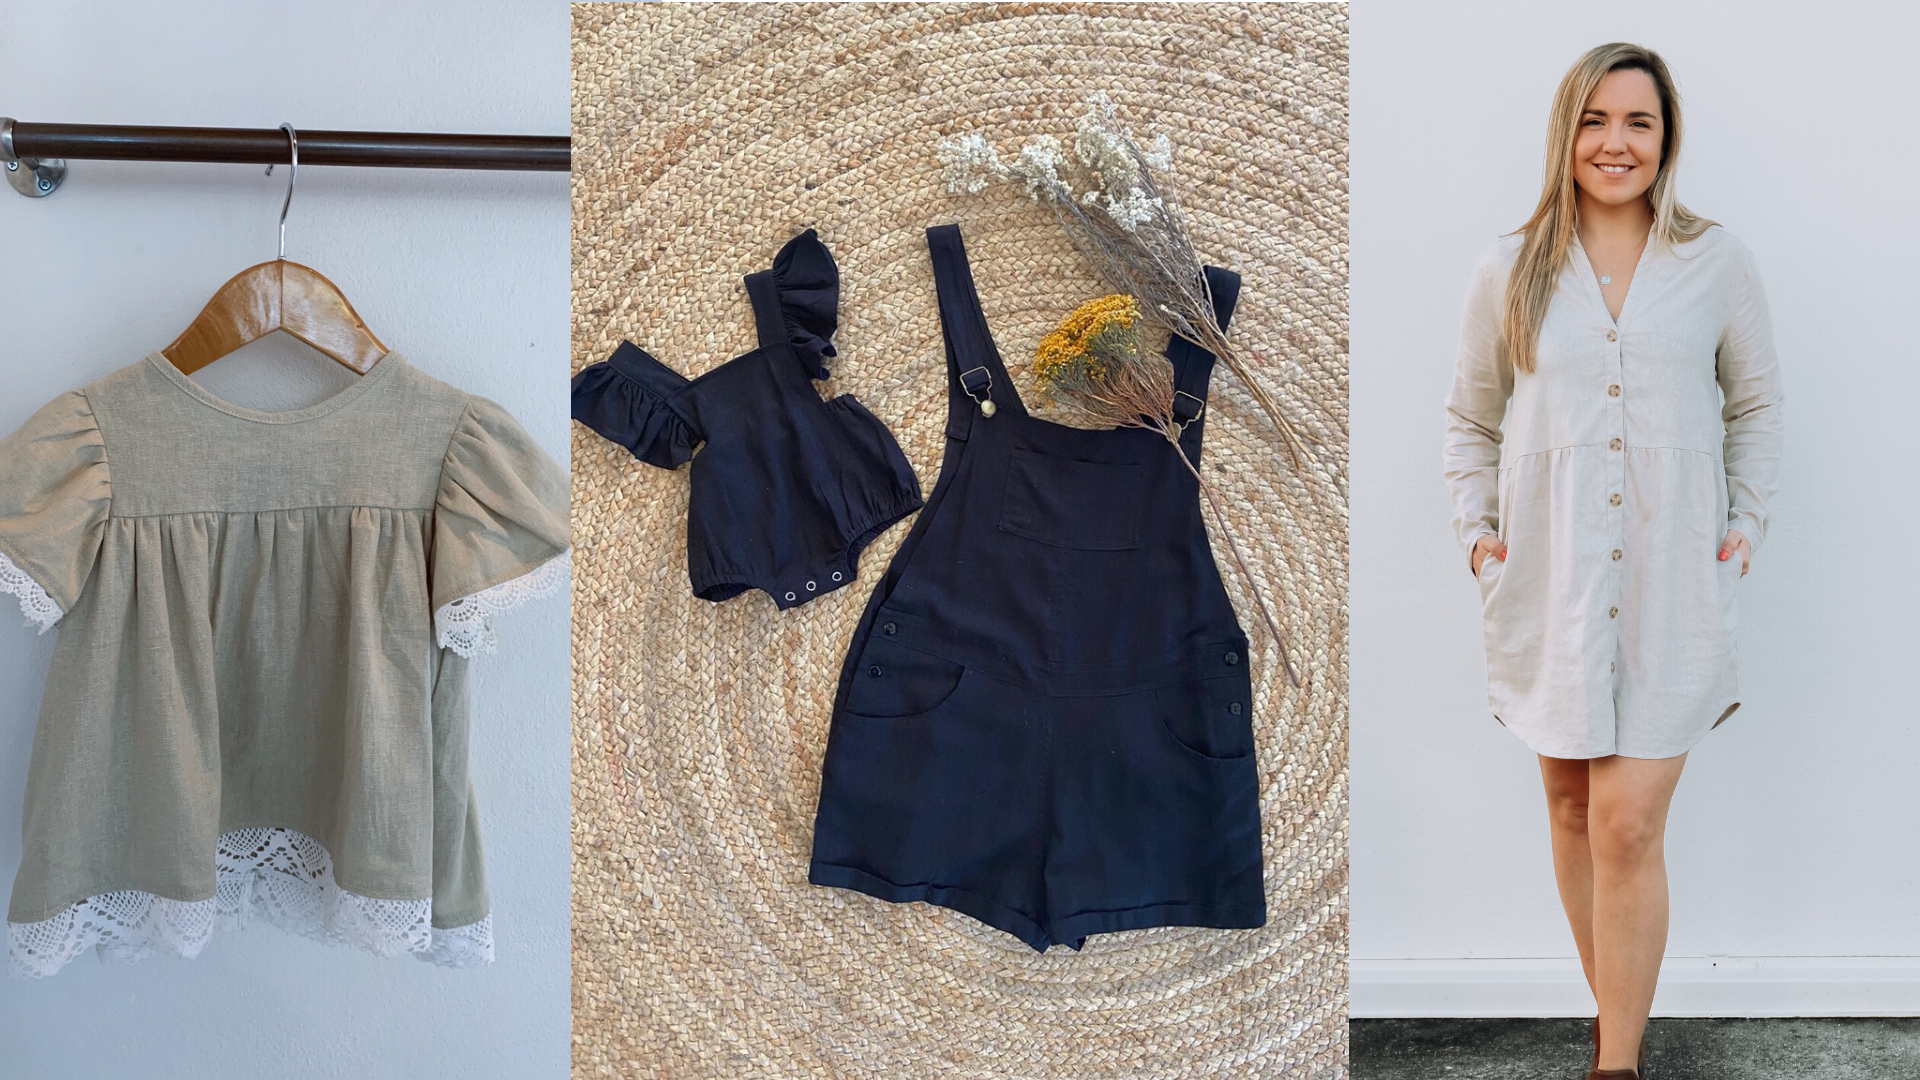 Our favourite bump-friendly linen dresses and matching baby styles by Dreamers & Drifters